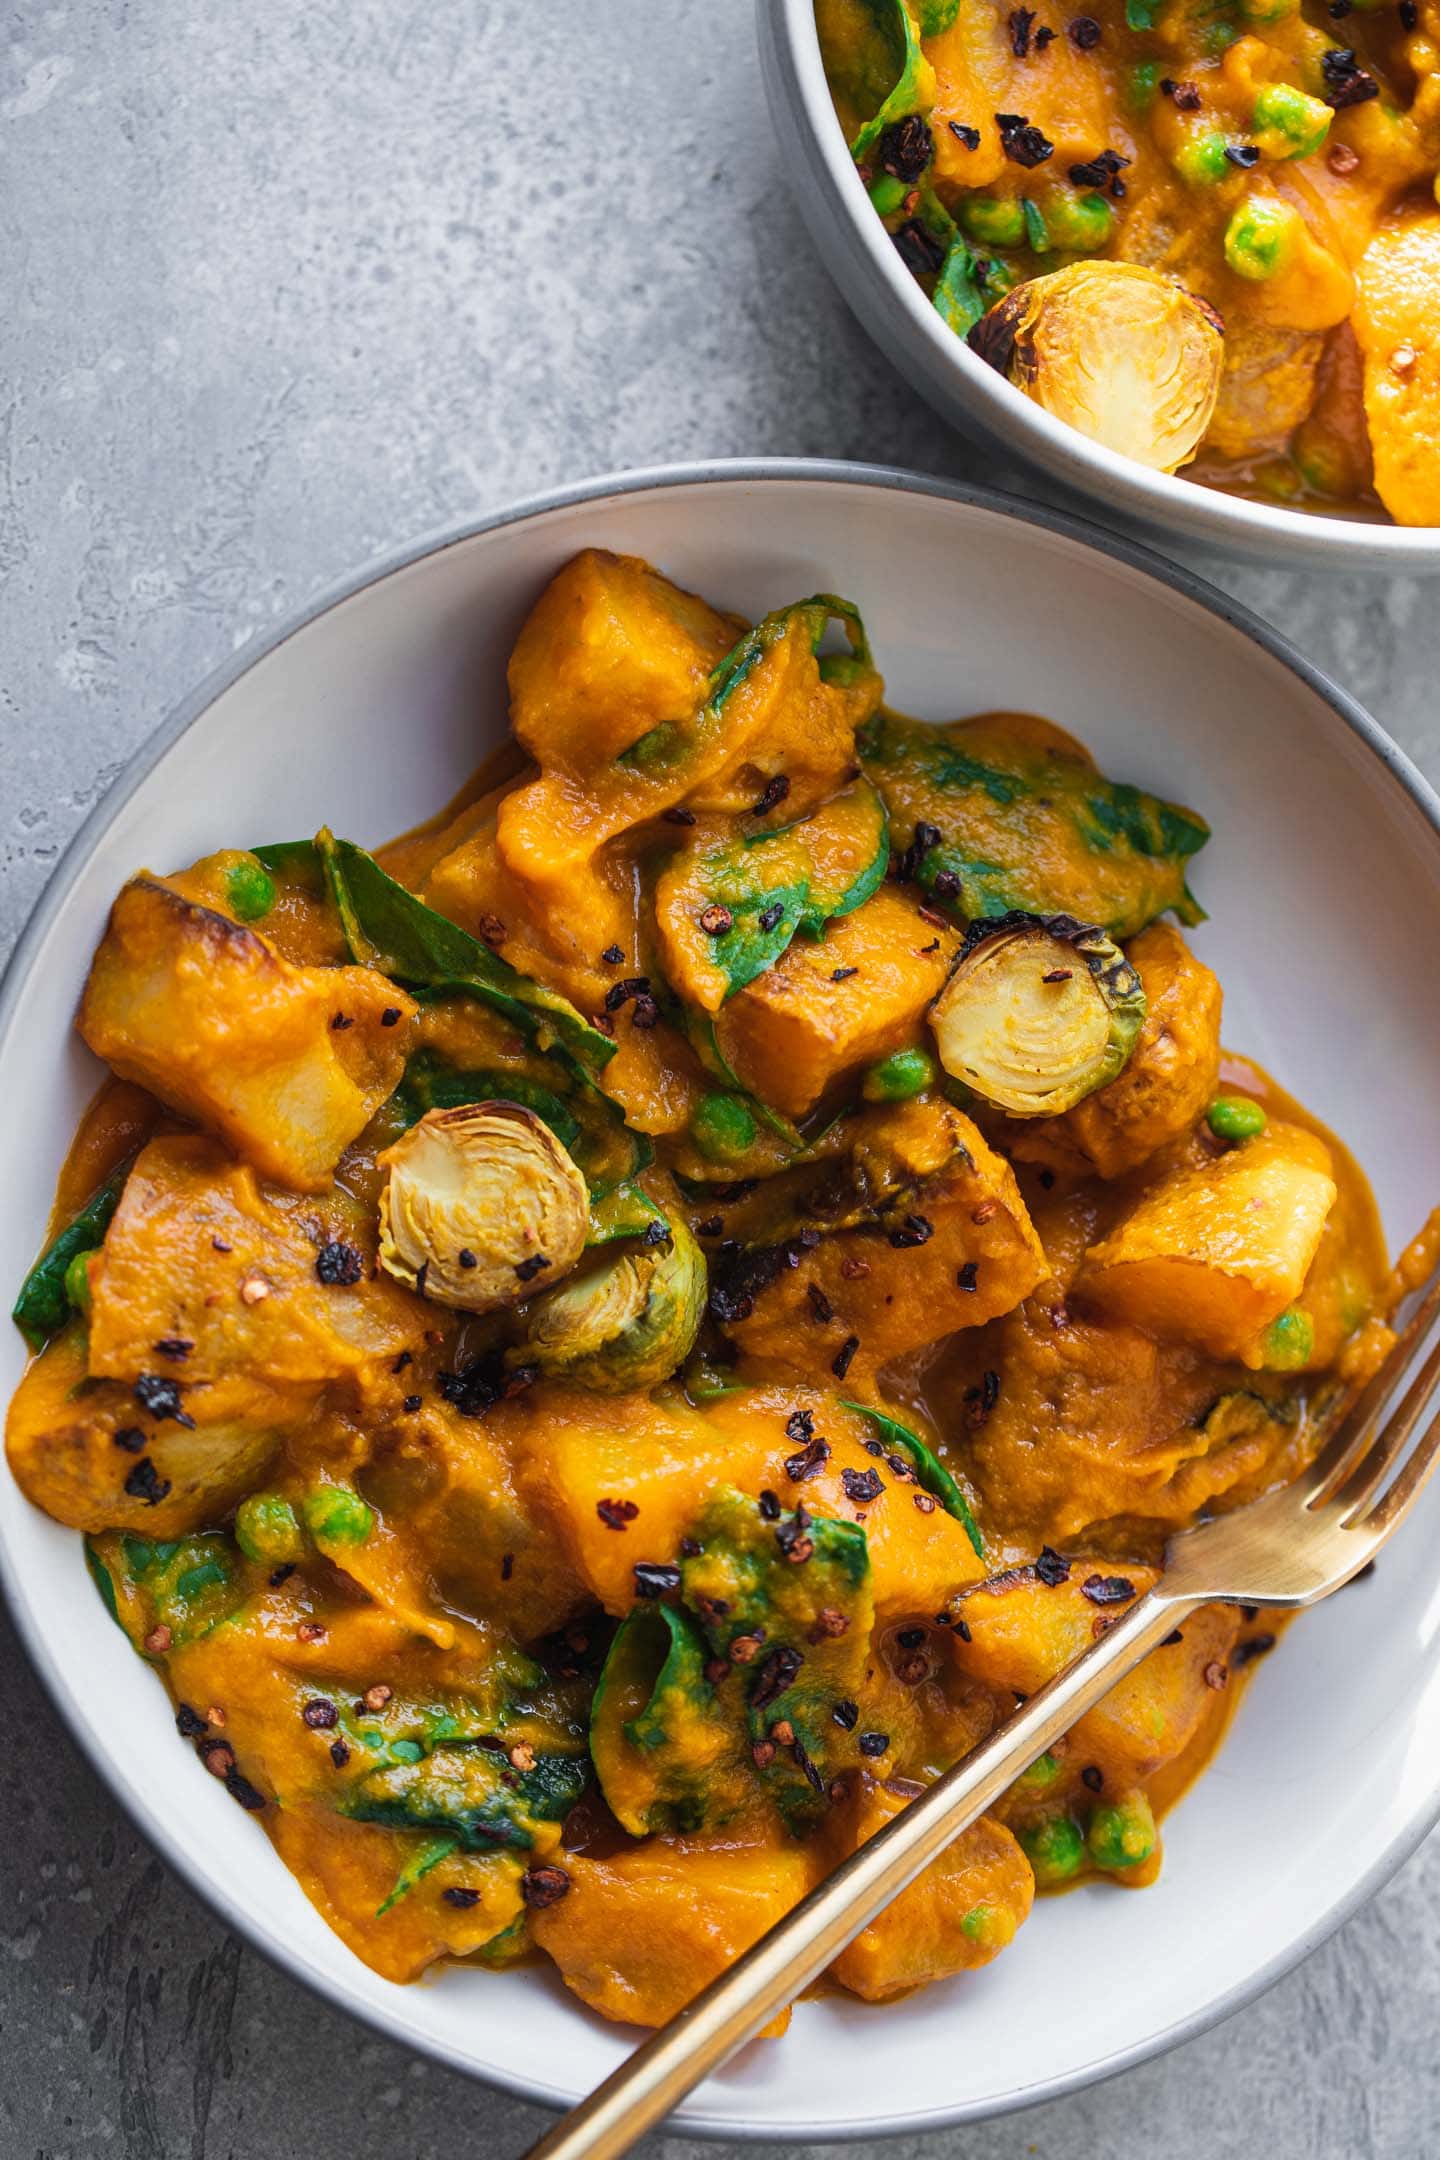 Roasted potatoes and Brussels sprouts in a 'cheesy' sauce